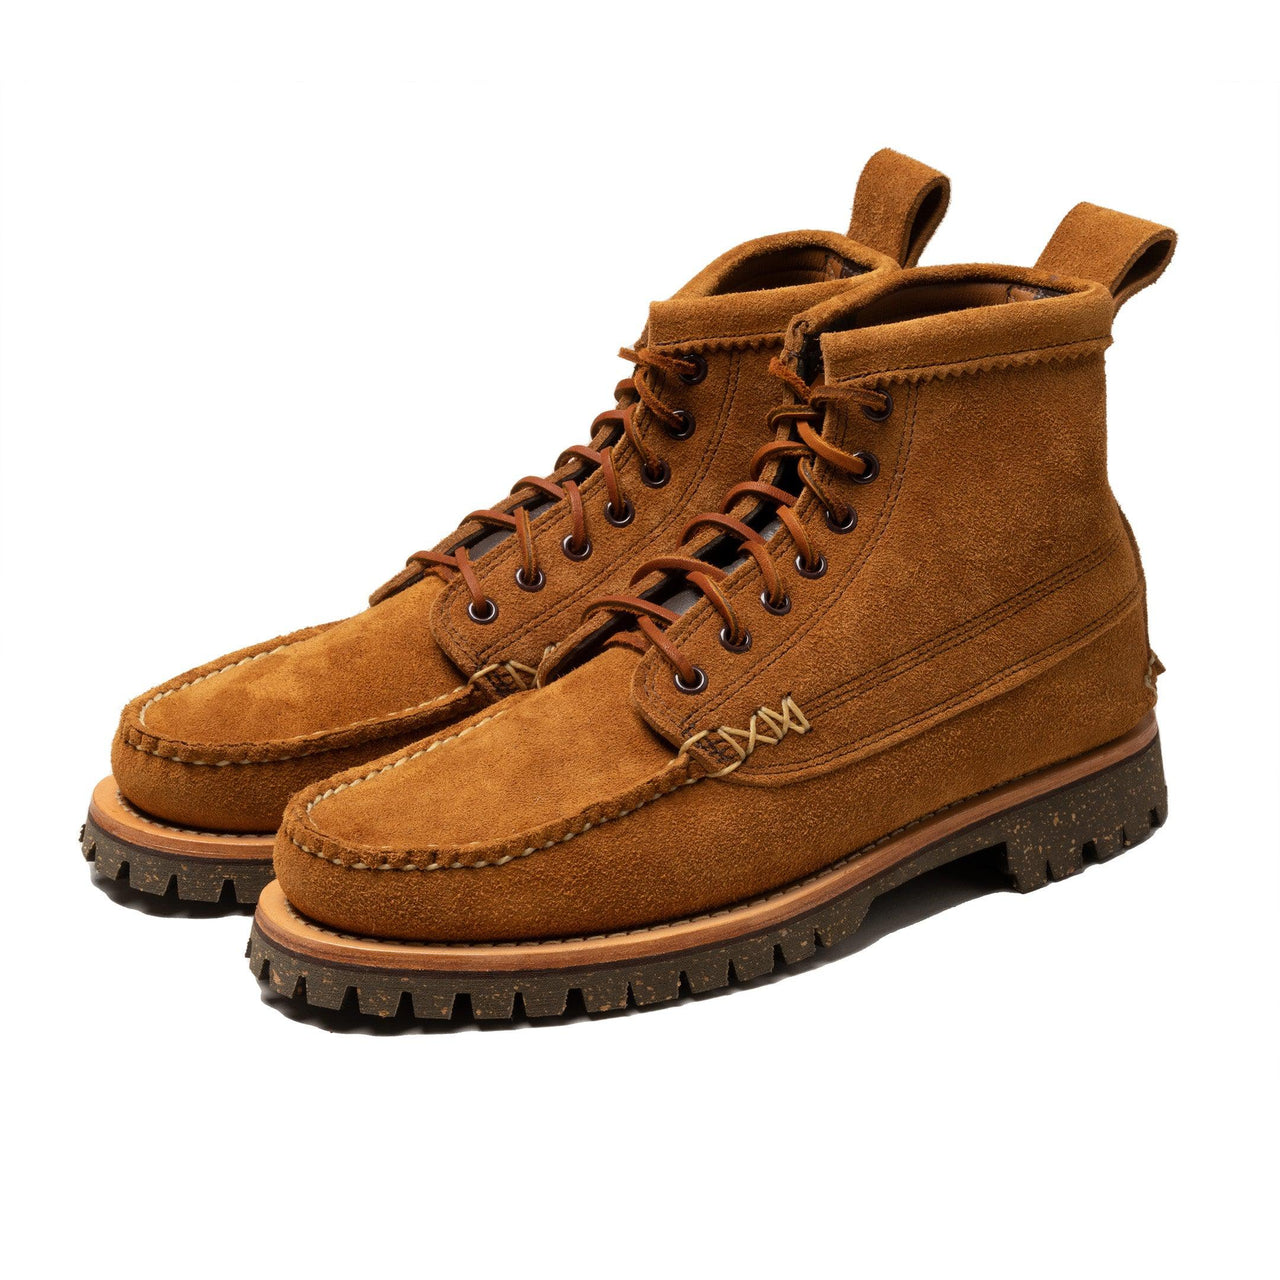 Yuketen Angler Boots w/Cortina Sole FO G Brown-Boots-Clutch Cafe